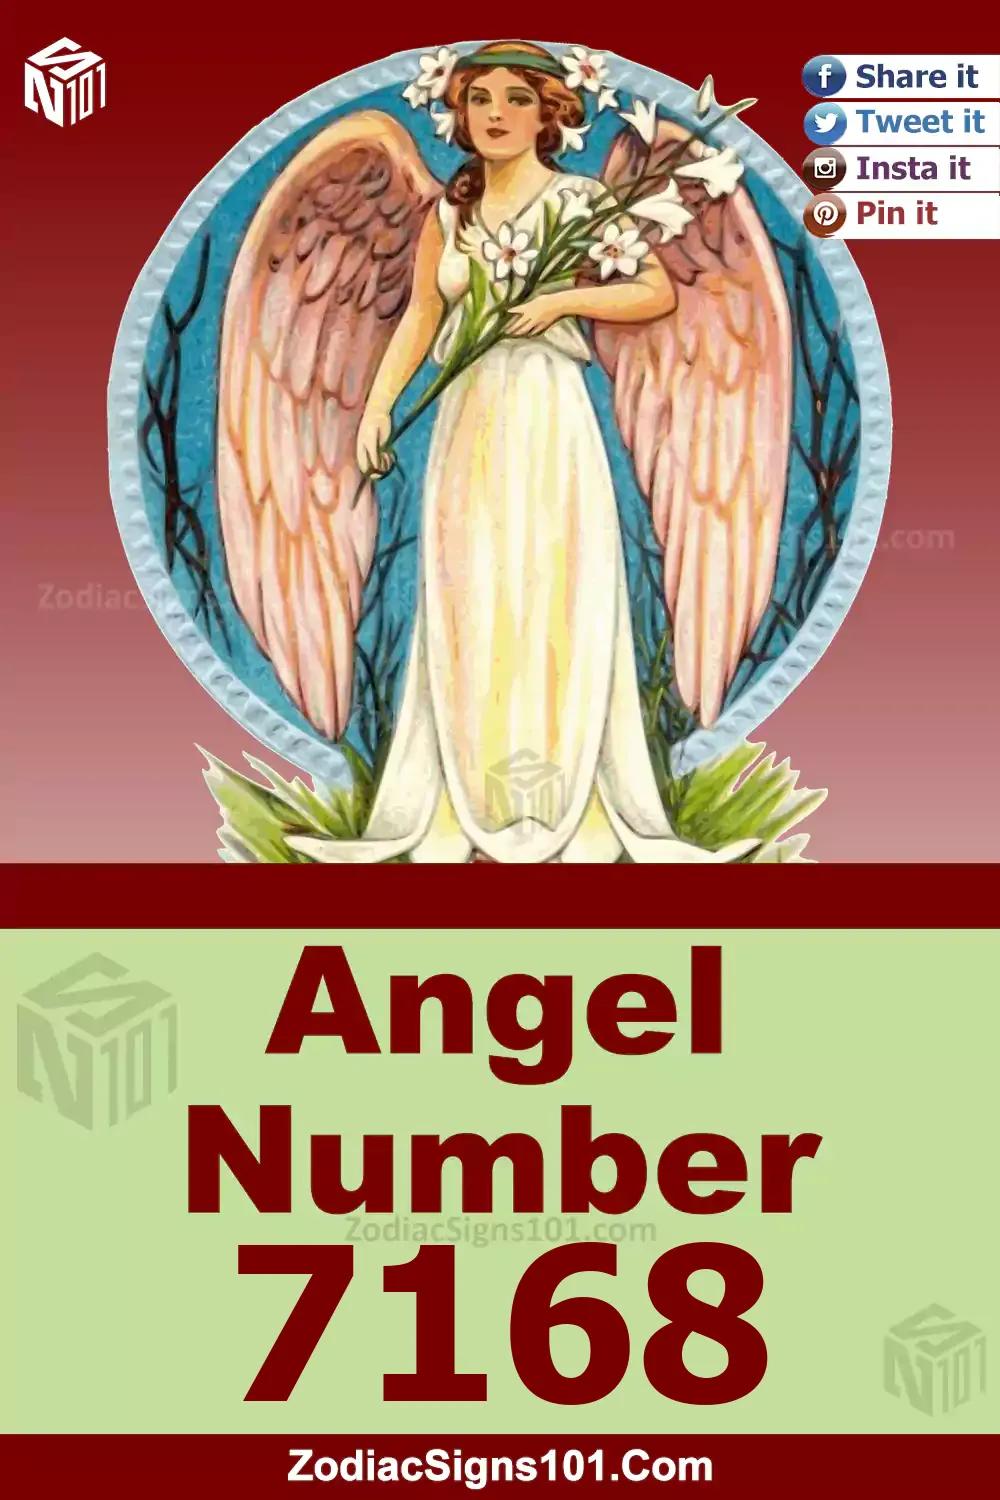 7168 Angel Number Meaning